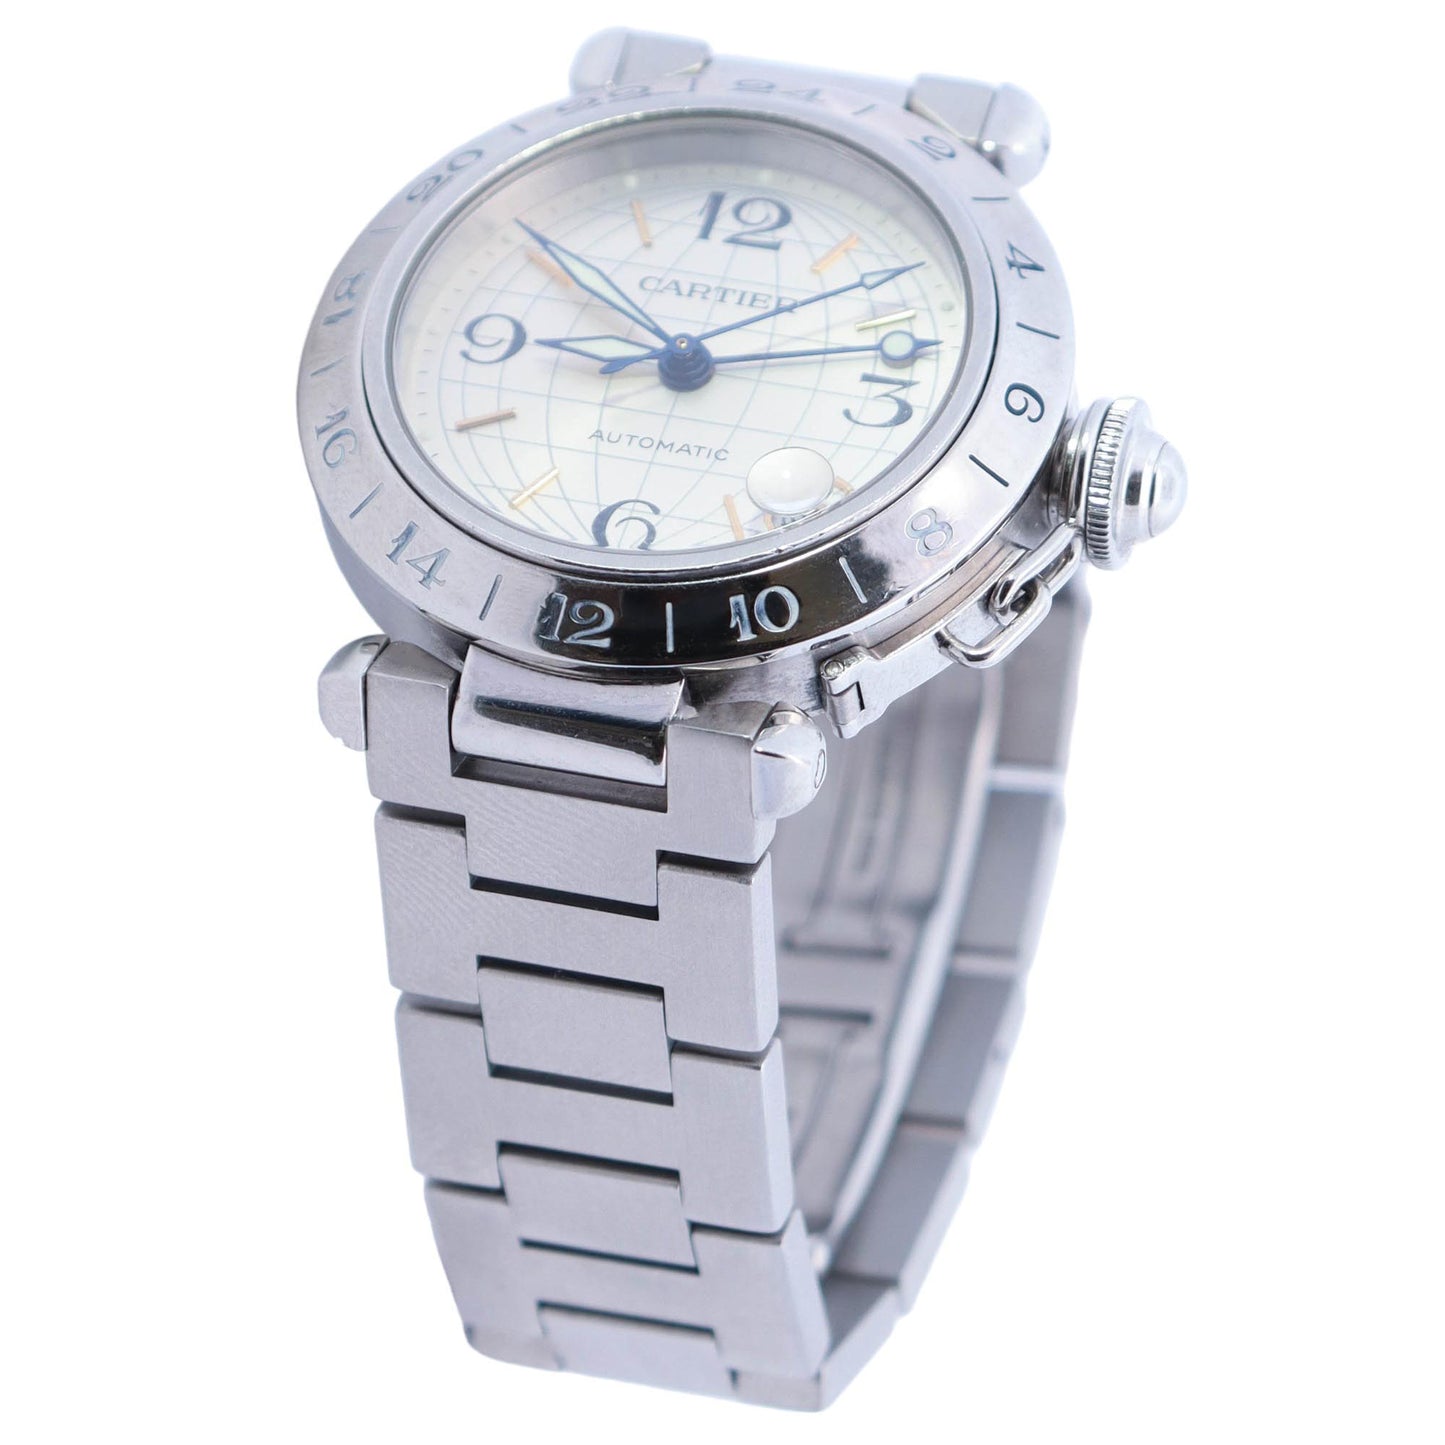 Cartier Pasha Stainless Steel 35mm White Arabic & Stick Dial Watch Reference# W31029M7